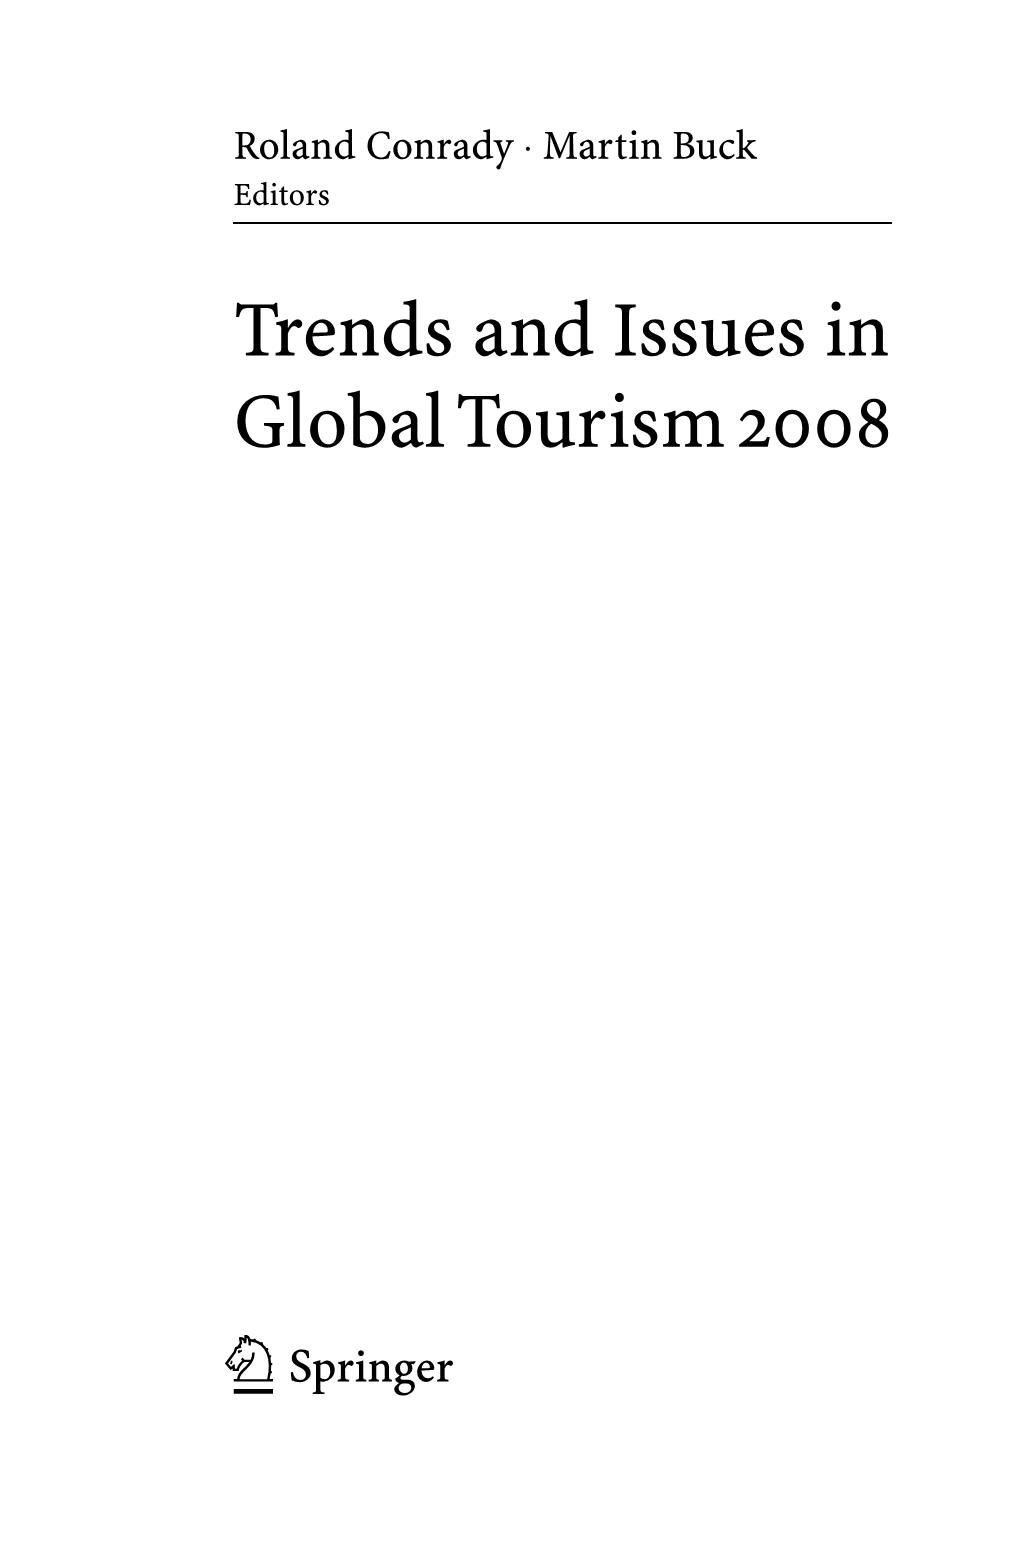 Trends and Issues in Globaltourism2008